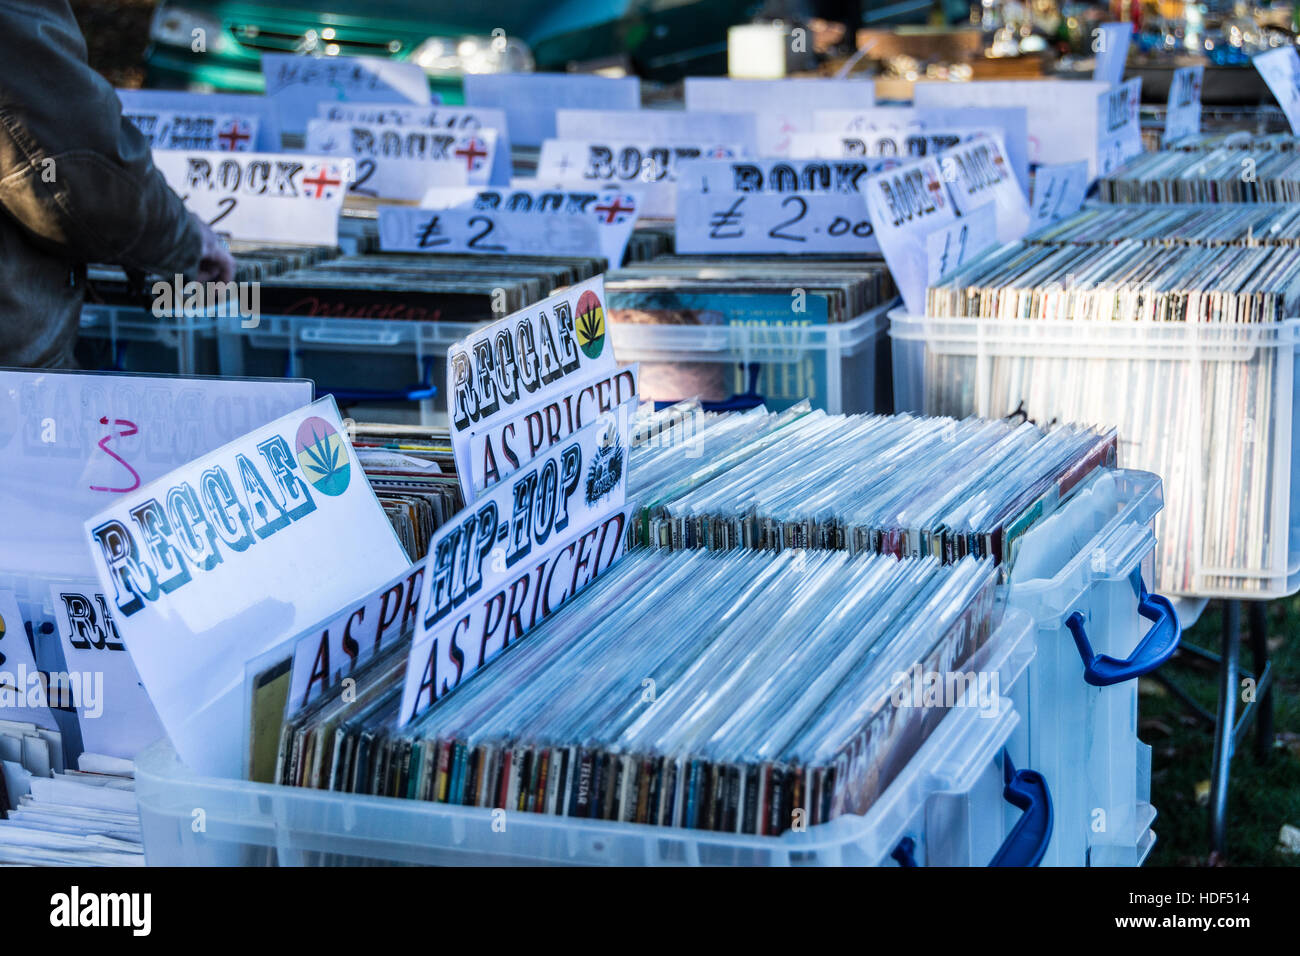 Old vinyl LP records on sale at a car boot sale in London, England, UK Stock Photo